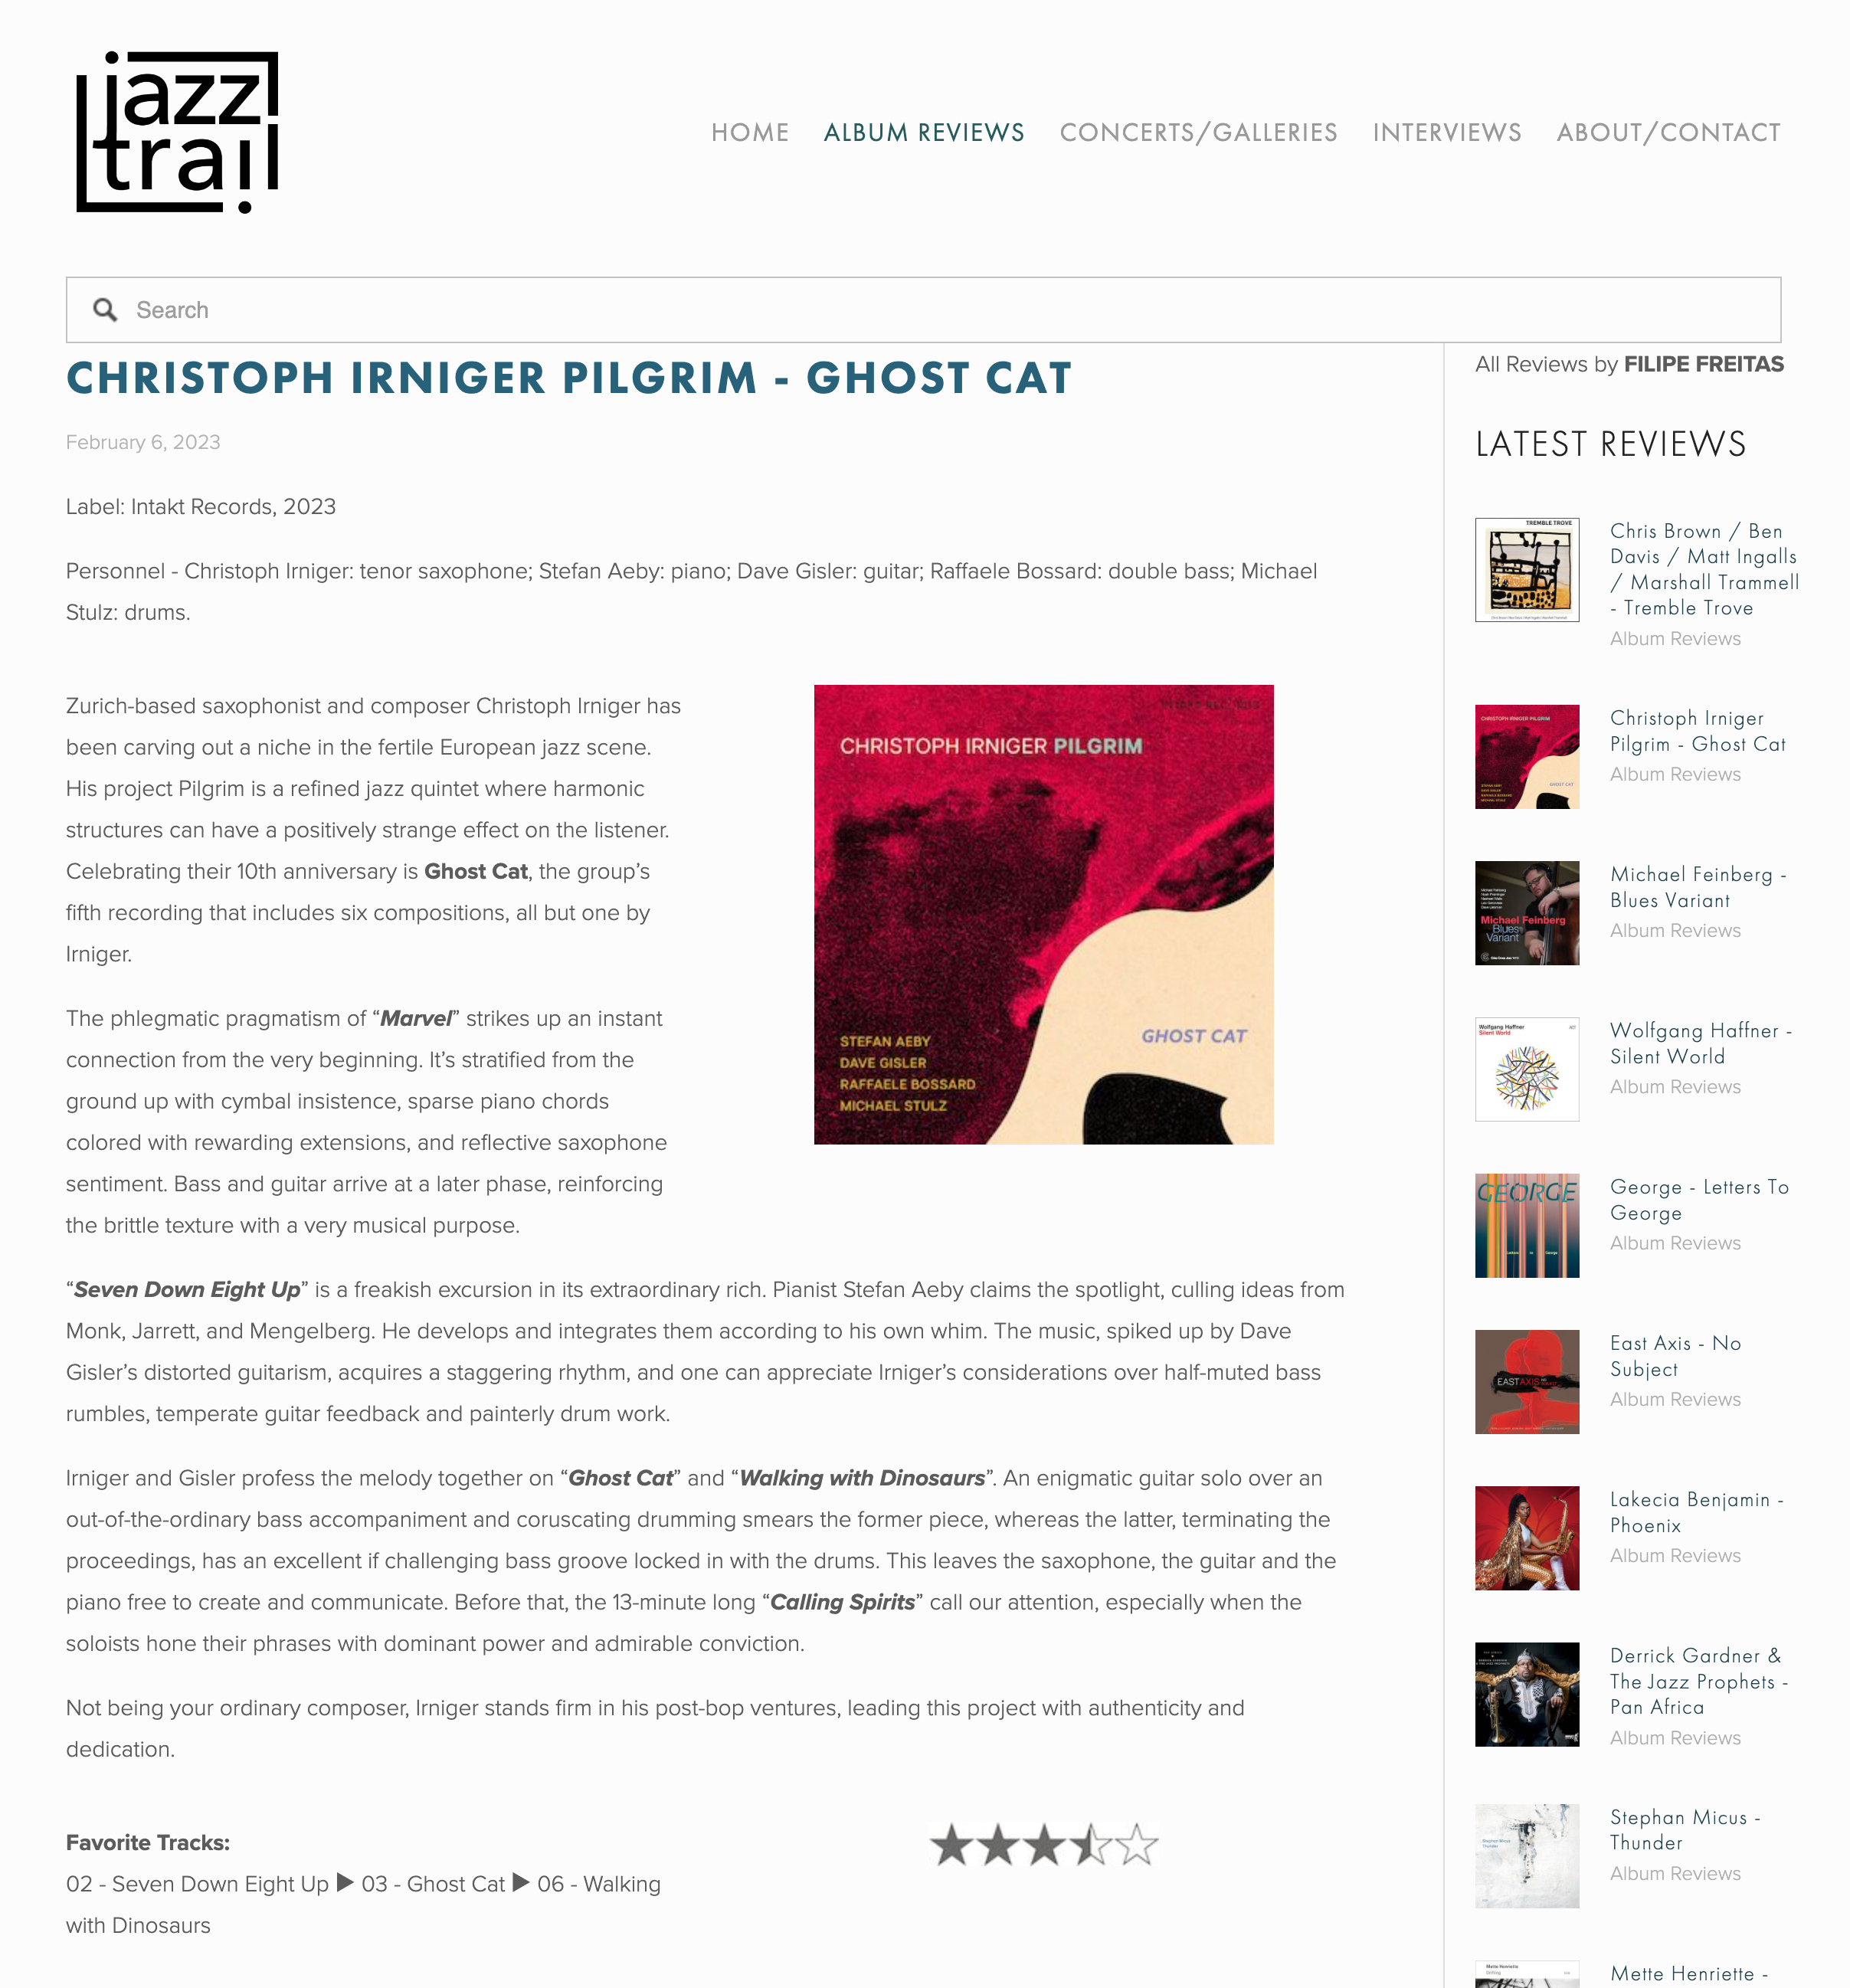 Zurich-based saxophonist and composer Christoph Irniger has been carving out a niche in the fertile European jazz scene. His project Pilgrim is a refined jazz quintet where harmonic structures can have a positively strange effect on the listener. Celebrating their 10th anniversary is Ghost Cat, the group’s fifth recording that includes six compositions, all but one by Irniger.